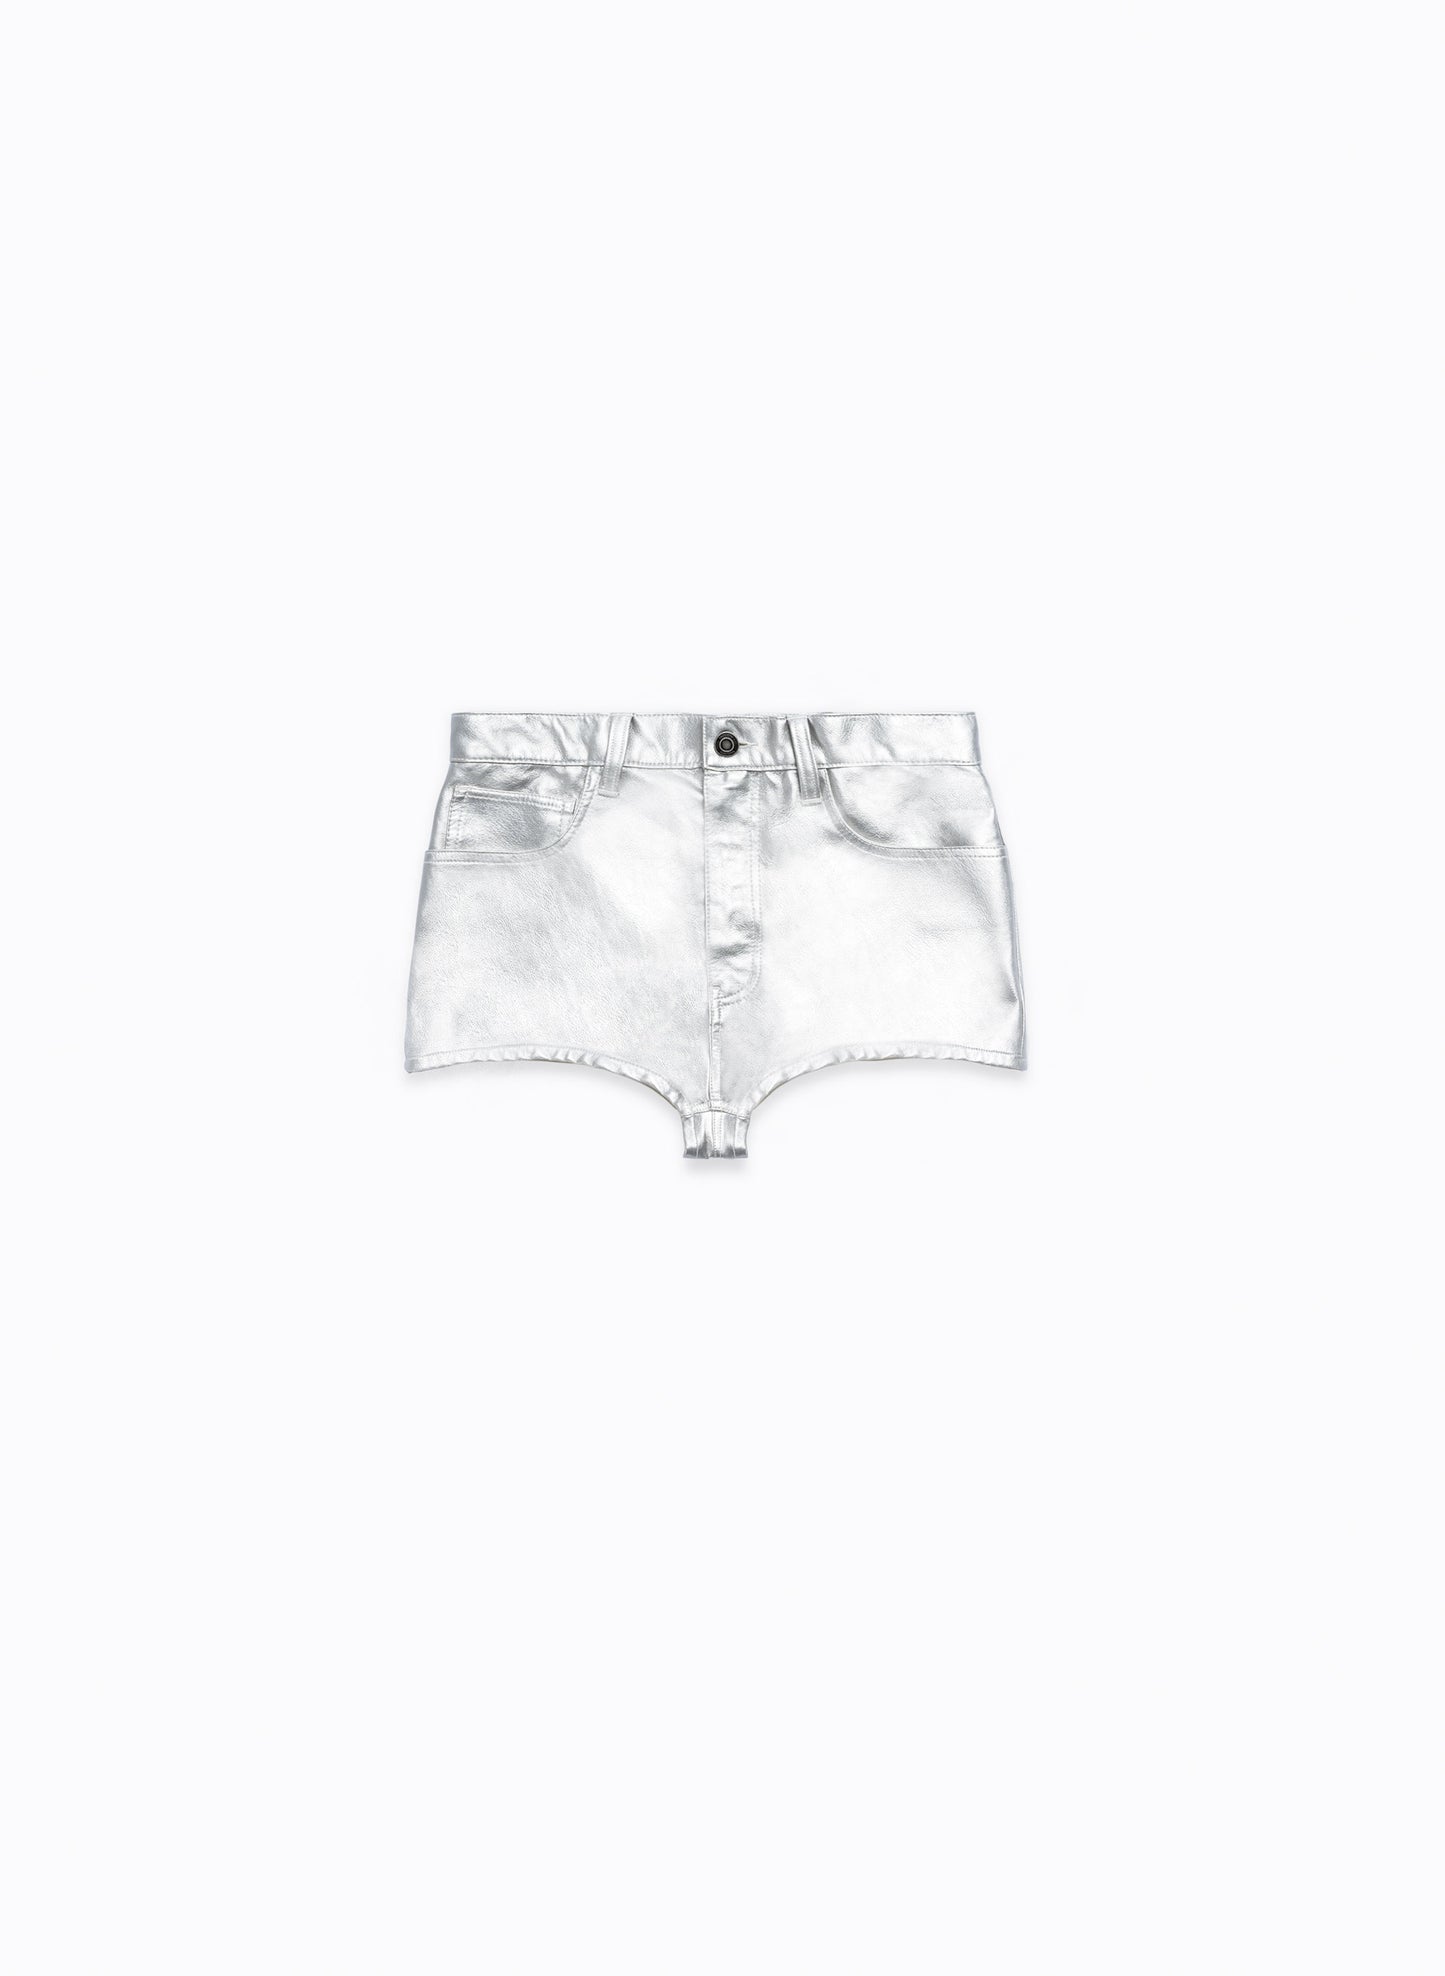 Patent Leather Fitted Shorts in Silver